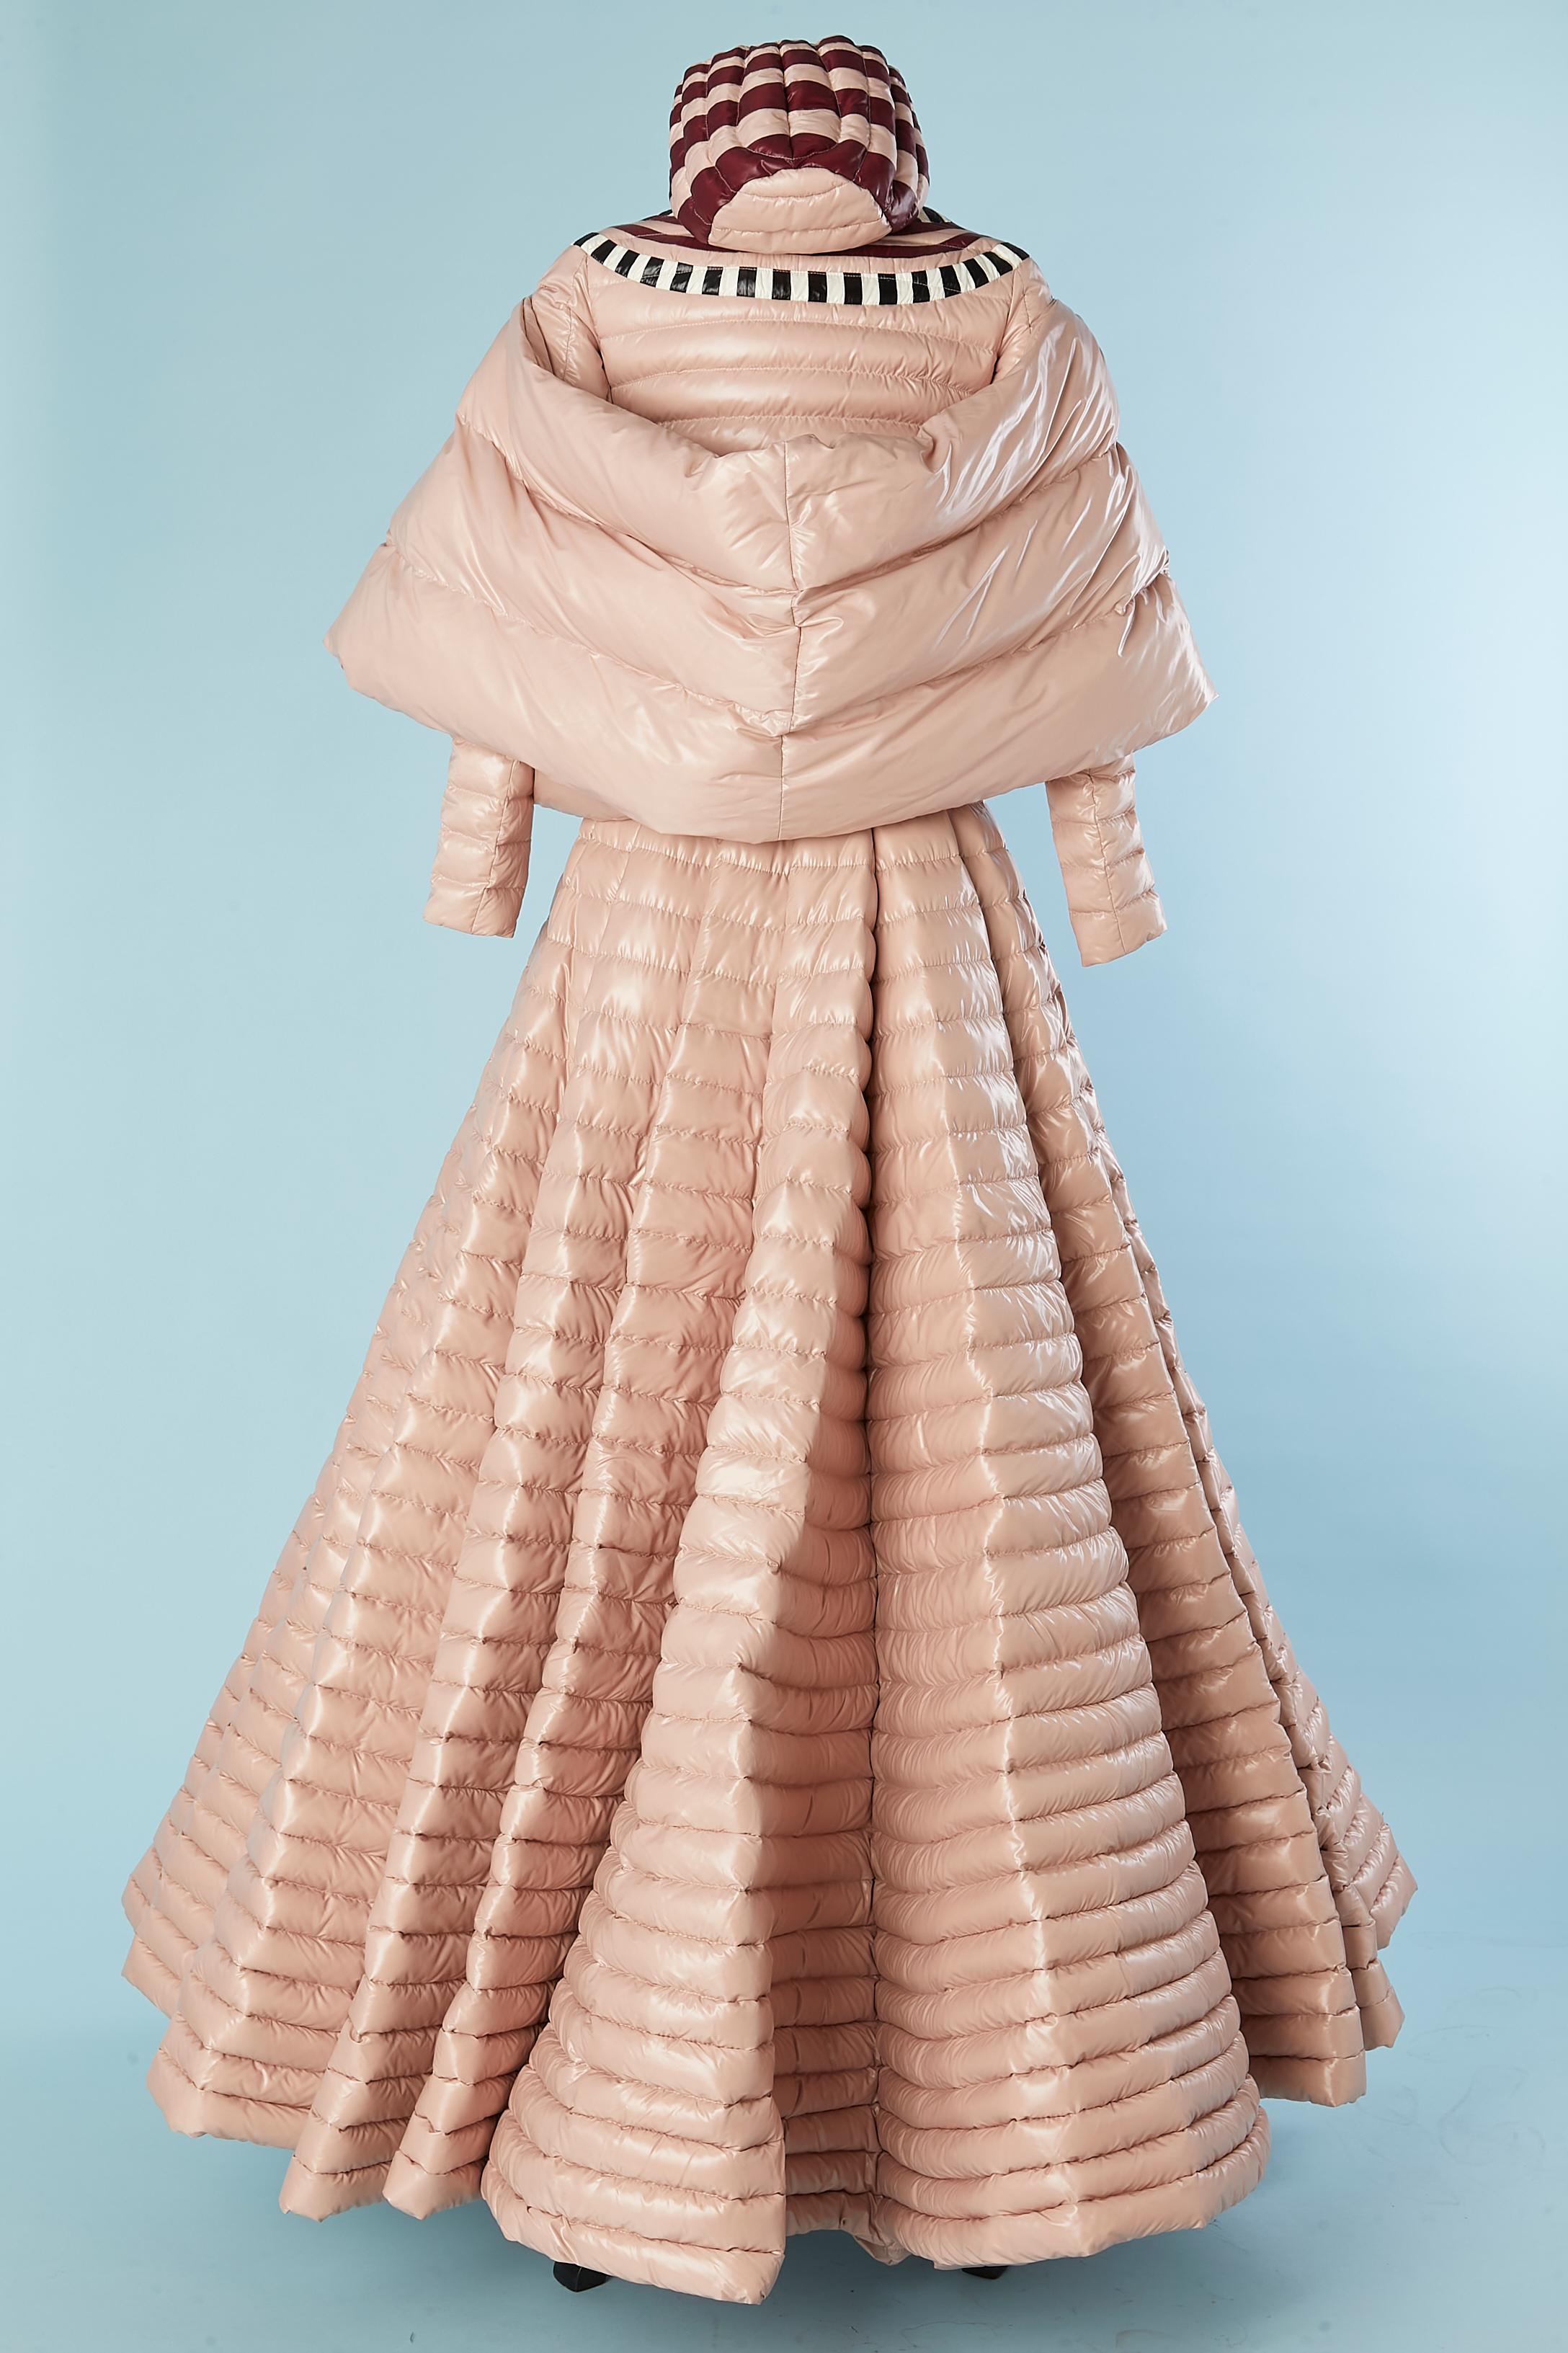 Goose down jacket, cape and crinoline skirt Moncler Genius by Pierpaolo Piccioli For Sale 2